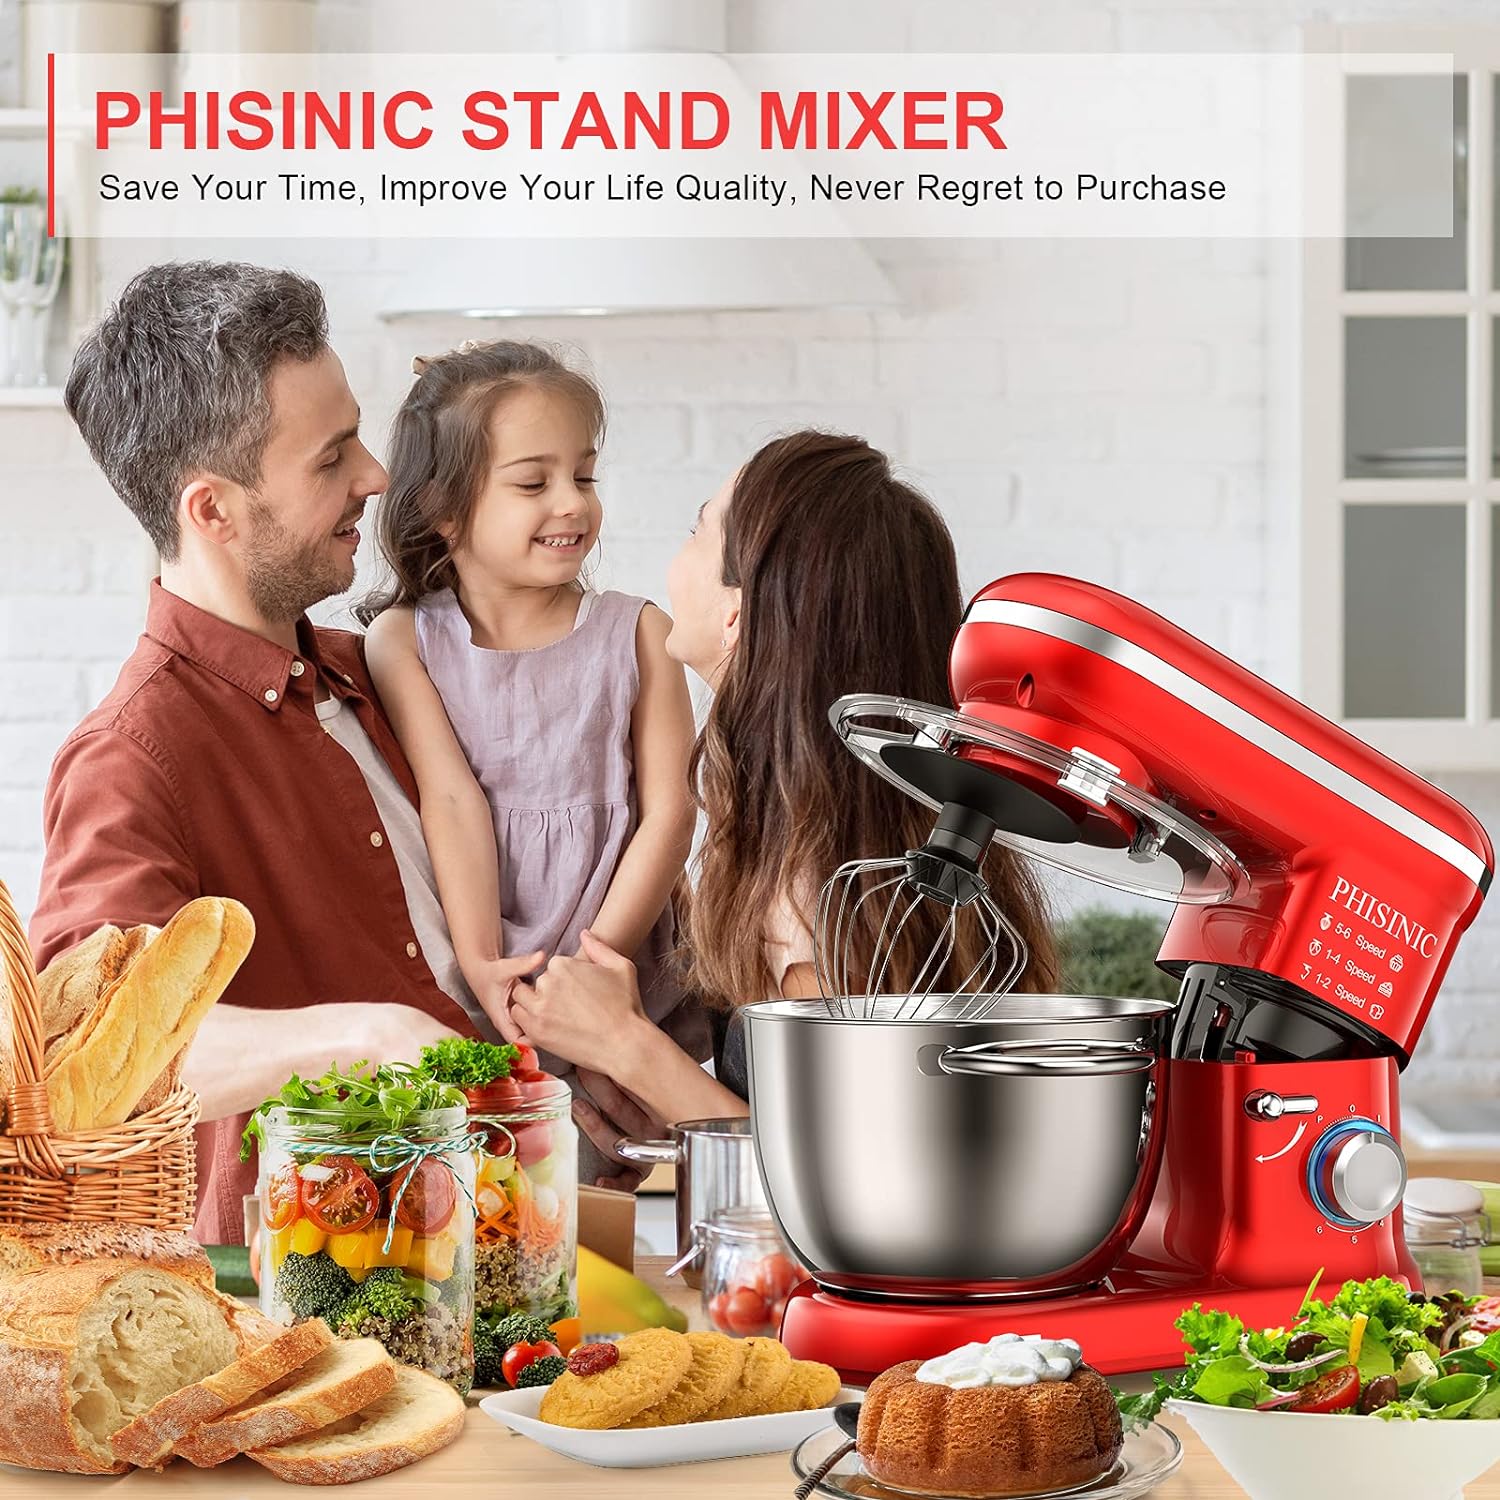 Phisinic Food Stand Mixer, 1500 W, Kneading Machine with 5.5 L Stainless Steel Bowl, 6 Speeds, Dough Machine with Dough Hook, Whisk, Flat Stirrer and Splash Guard